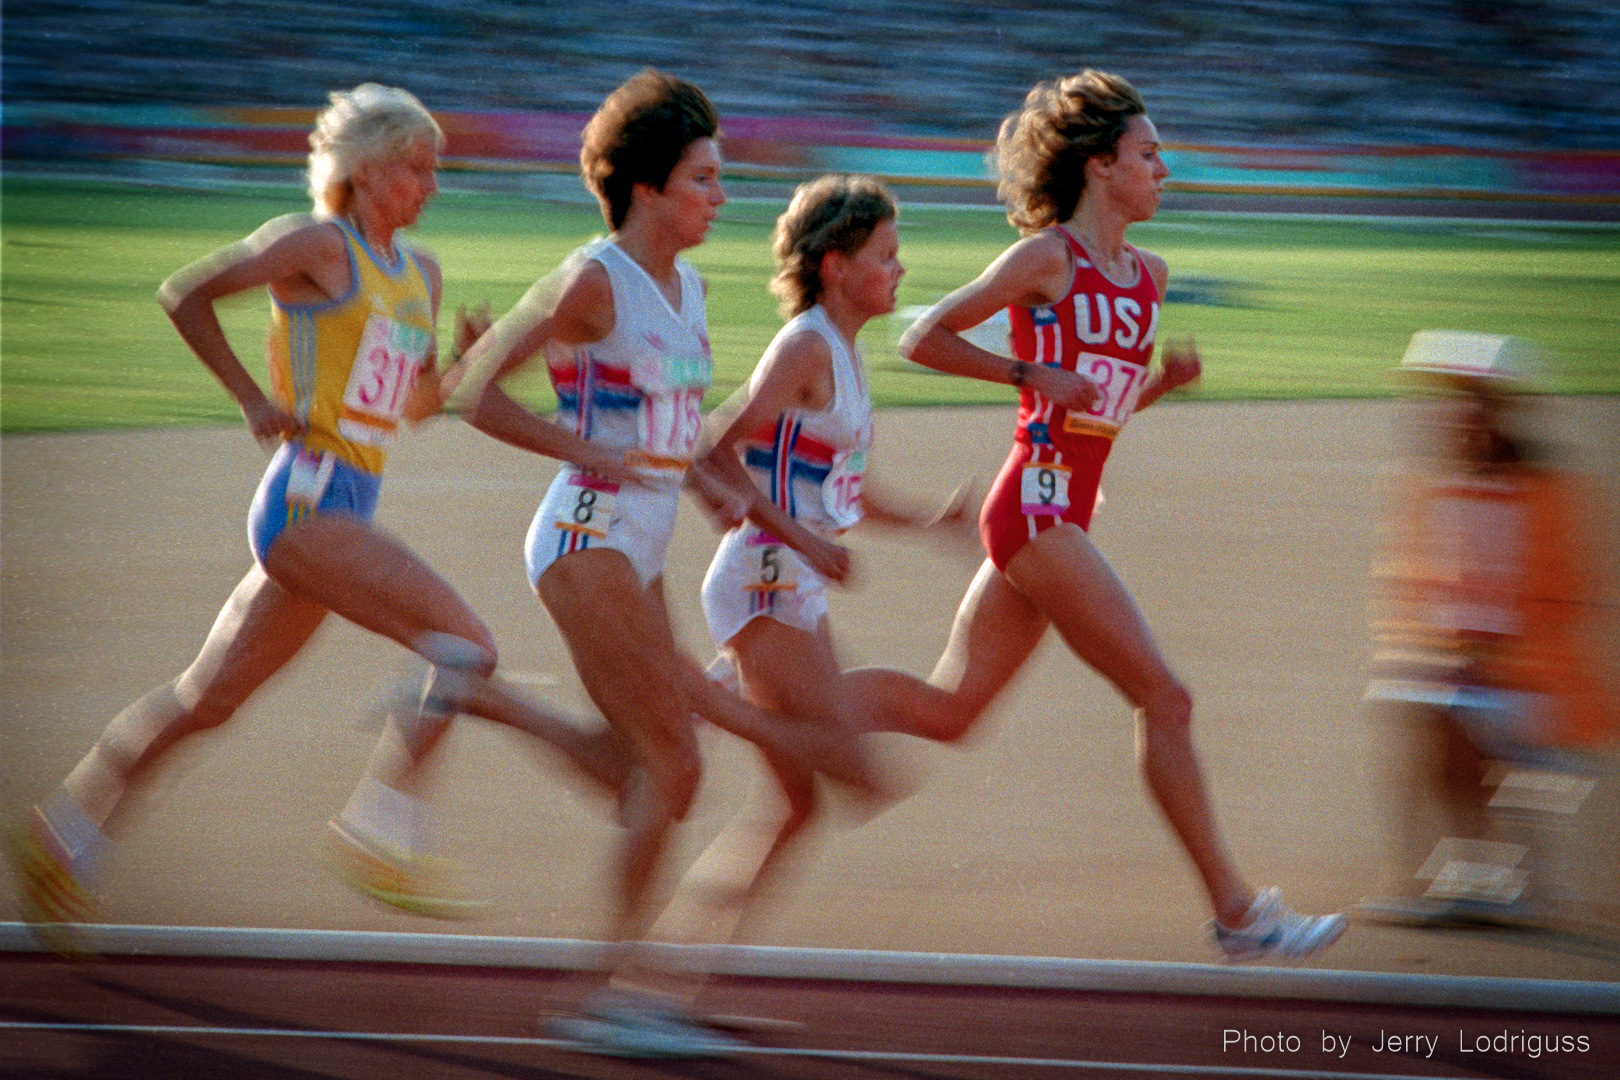 In the most anticipated event of the 1984 Olympics, America's sweetheart Mary Decker leads, with Britain's 18-year-old Zola Budd in second place as they face off in the women's 3000 meter finals in Los Angeles.  <br /><br />Decker, the reigning world champion in the 3,000 meters, was heavily favored to win a gold medal in front of her home fans in Los Angeles after missing the 1976 Olympics due to an injury, and also the 1980 games because of the U.S. boycott of the Moscow Olympics. Time was running out for her to win an Olympic medal.